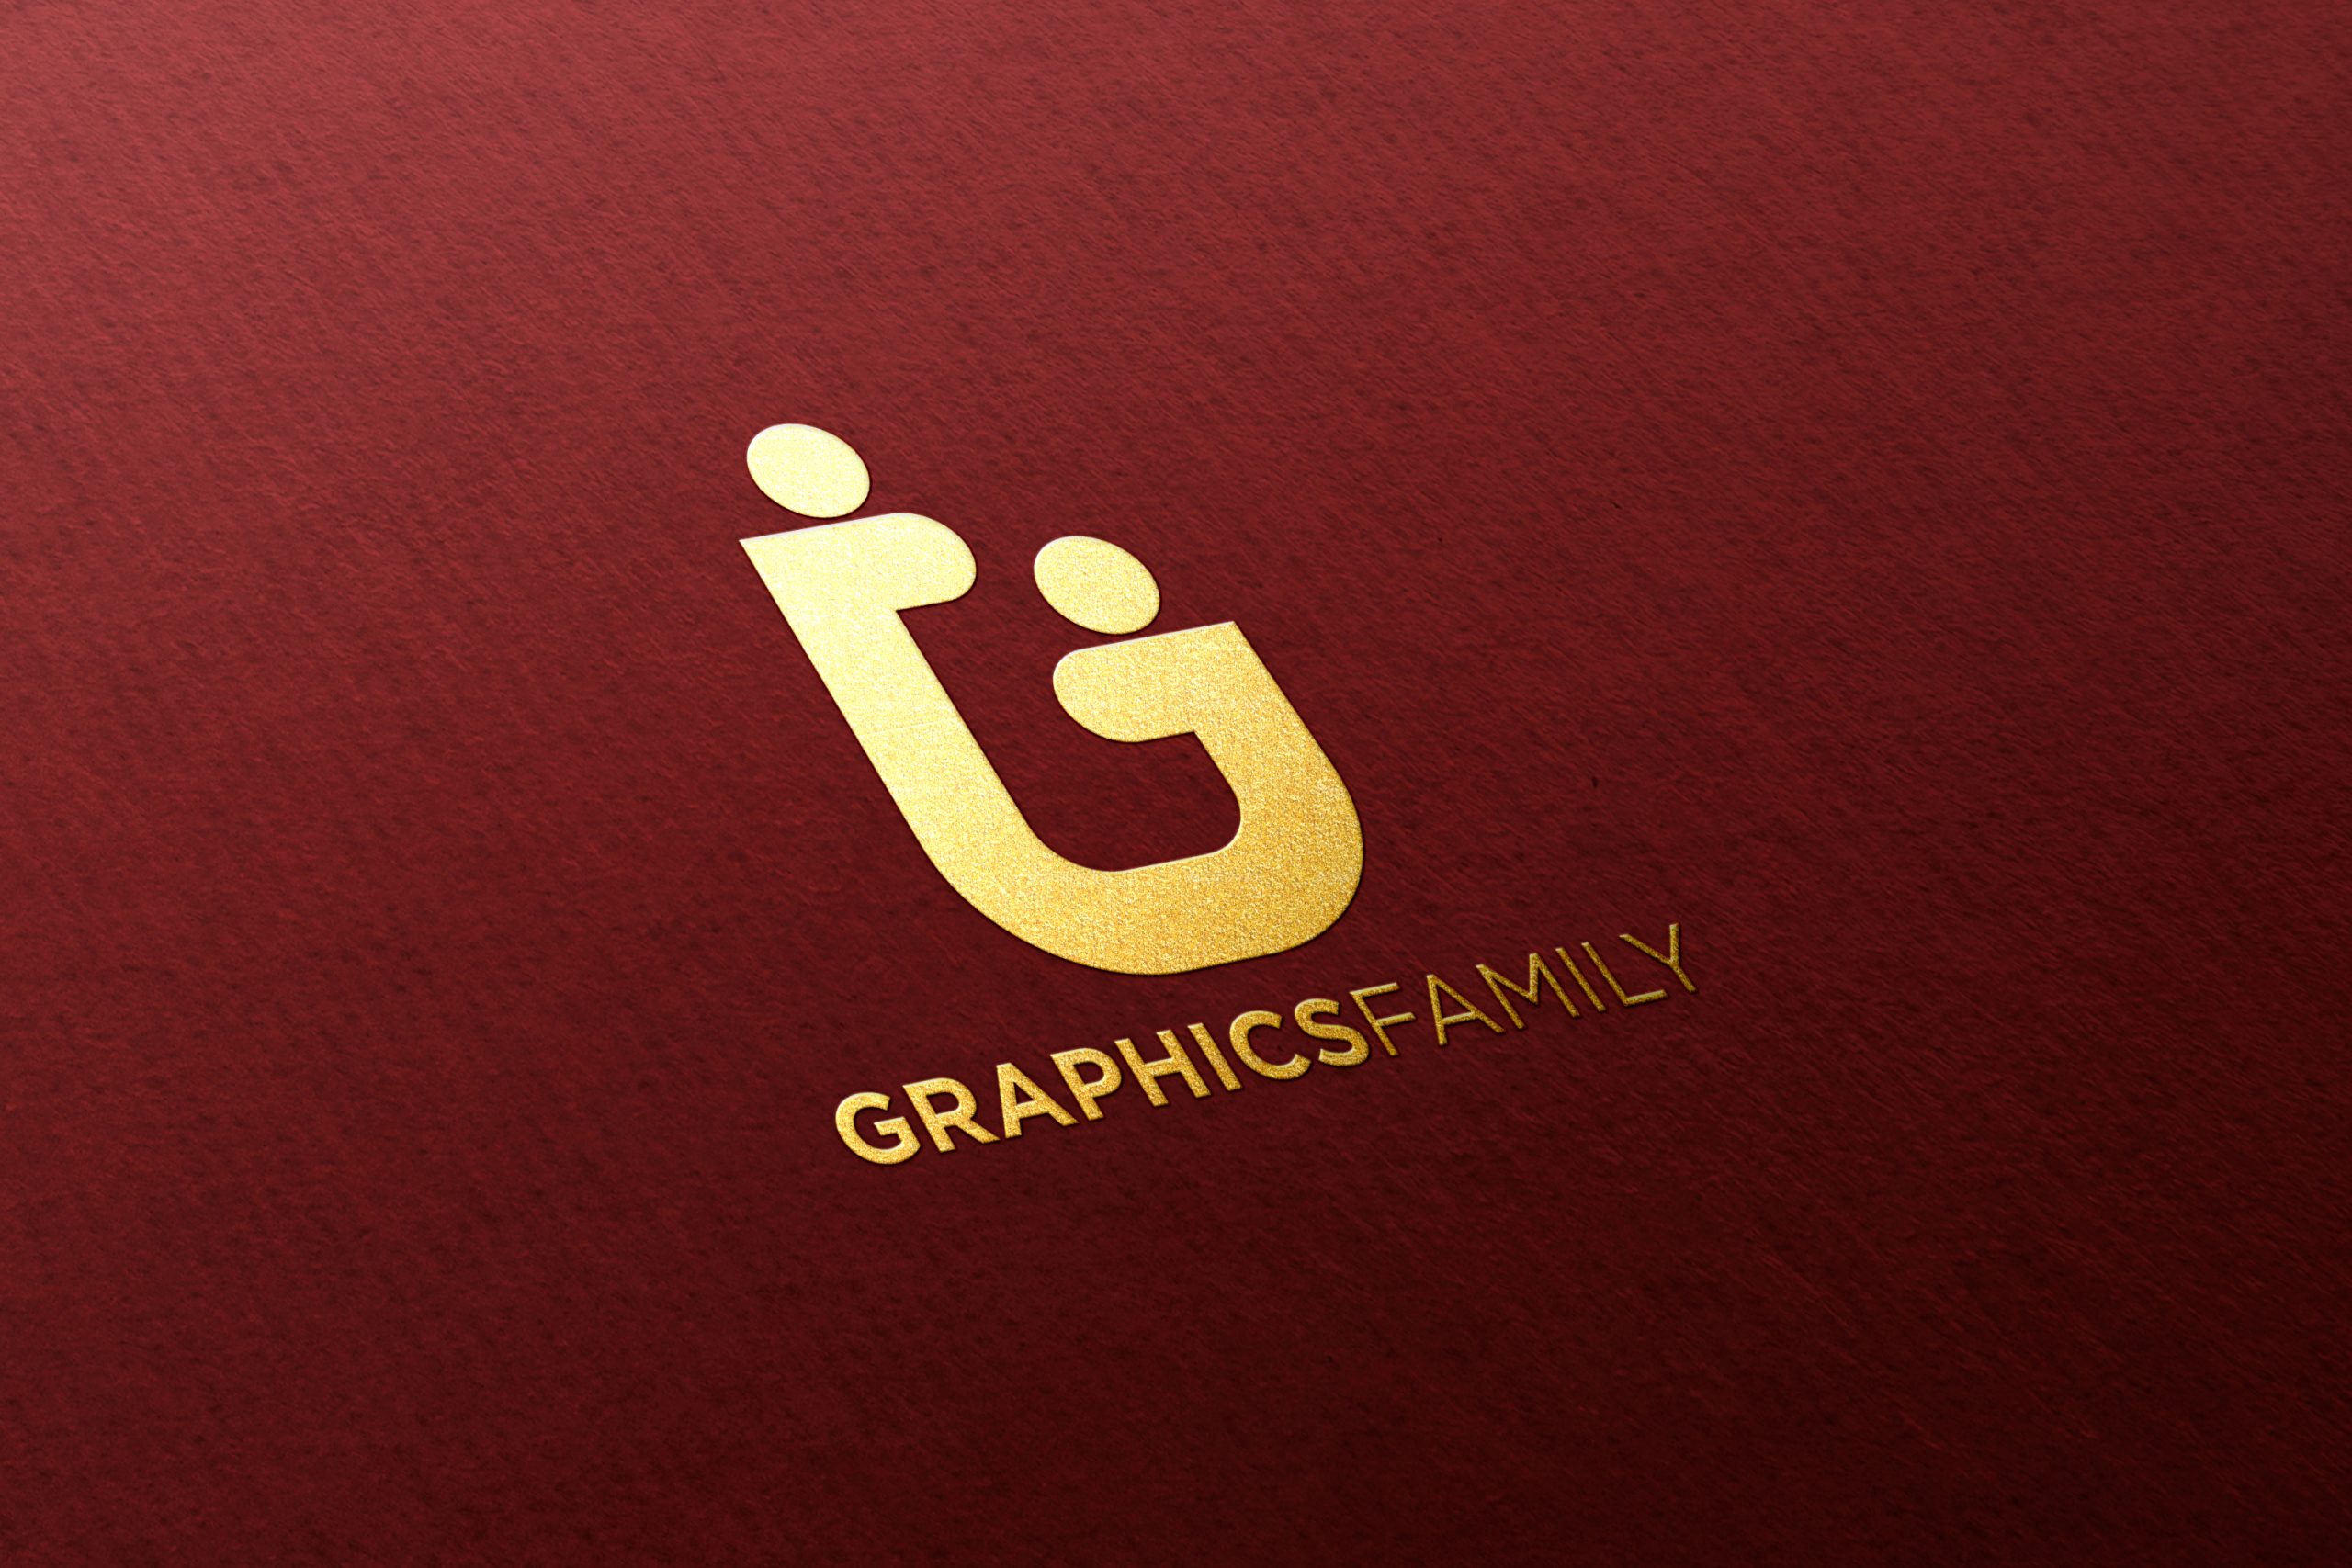 3D Logo Mockup on Red Fabric Download